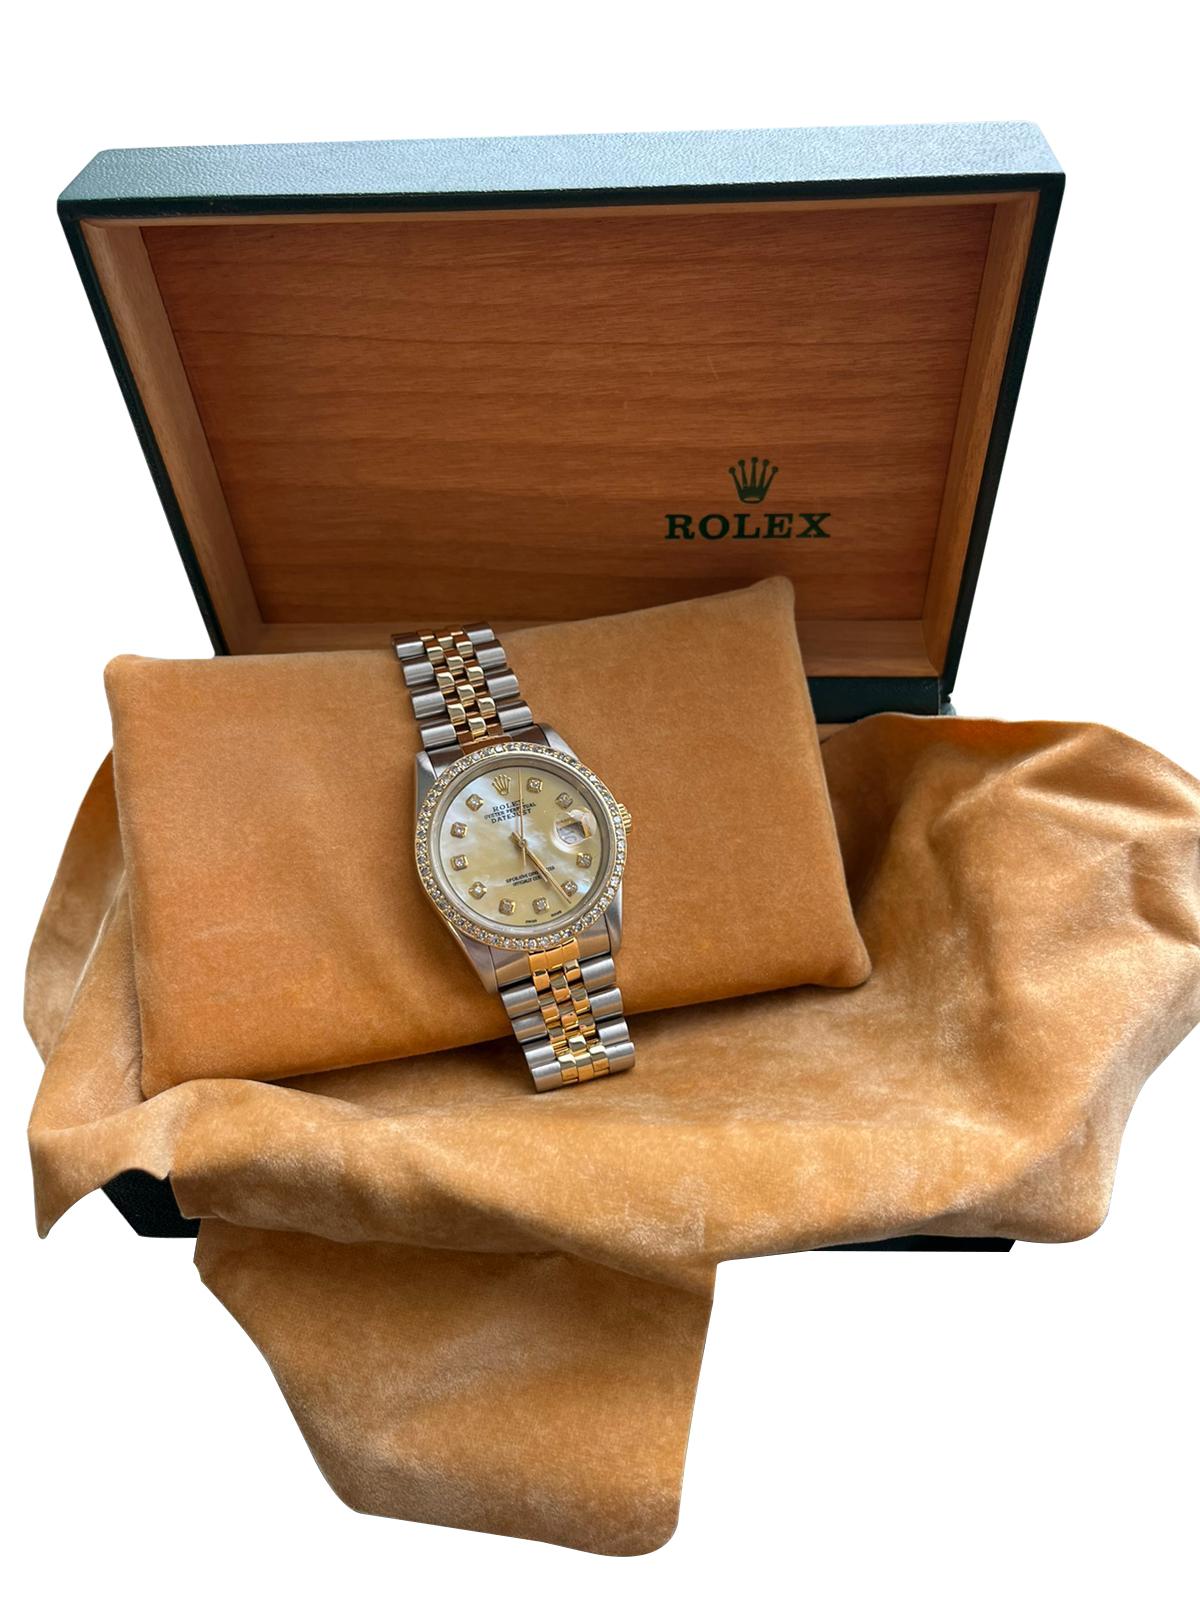 Rolex Datejust Steel Yellow Gold Mother of Pearl Diamond Mens Watch 16233. Officially certified chronometer automatic self-winding movement. Stainless steel case 36.0 mm in diameter. Rolex logo on a crown. Aftermarket Diamond Dial, Aftermarket